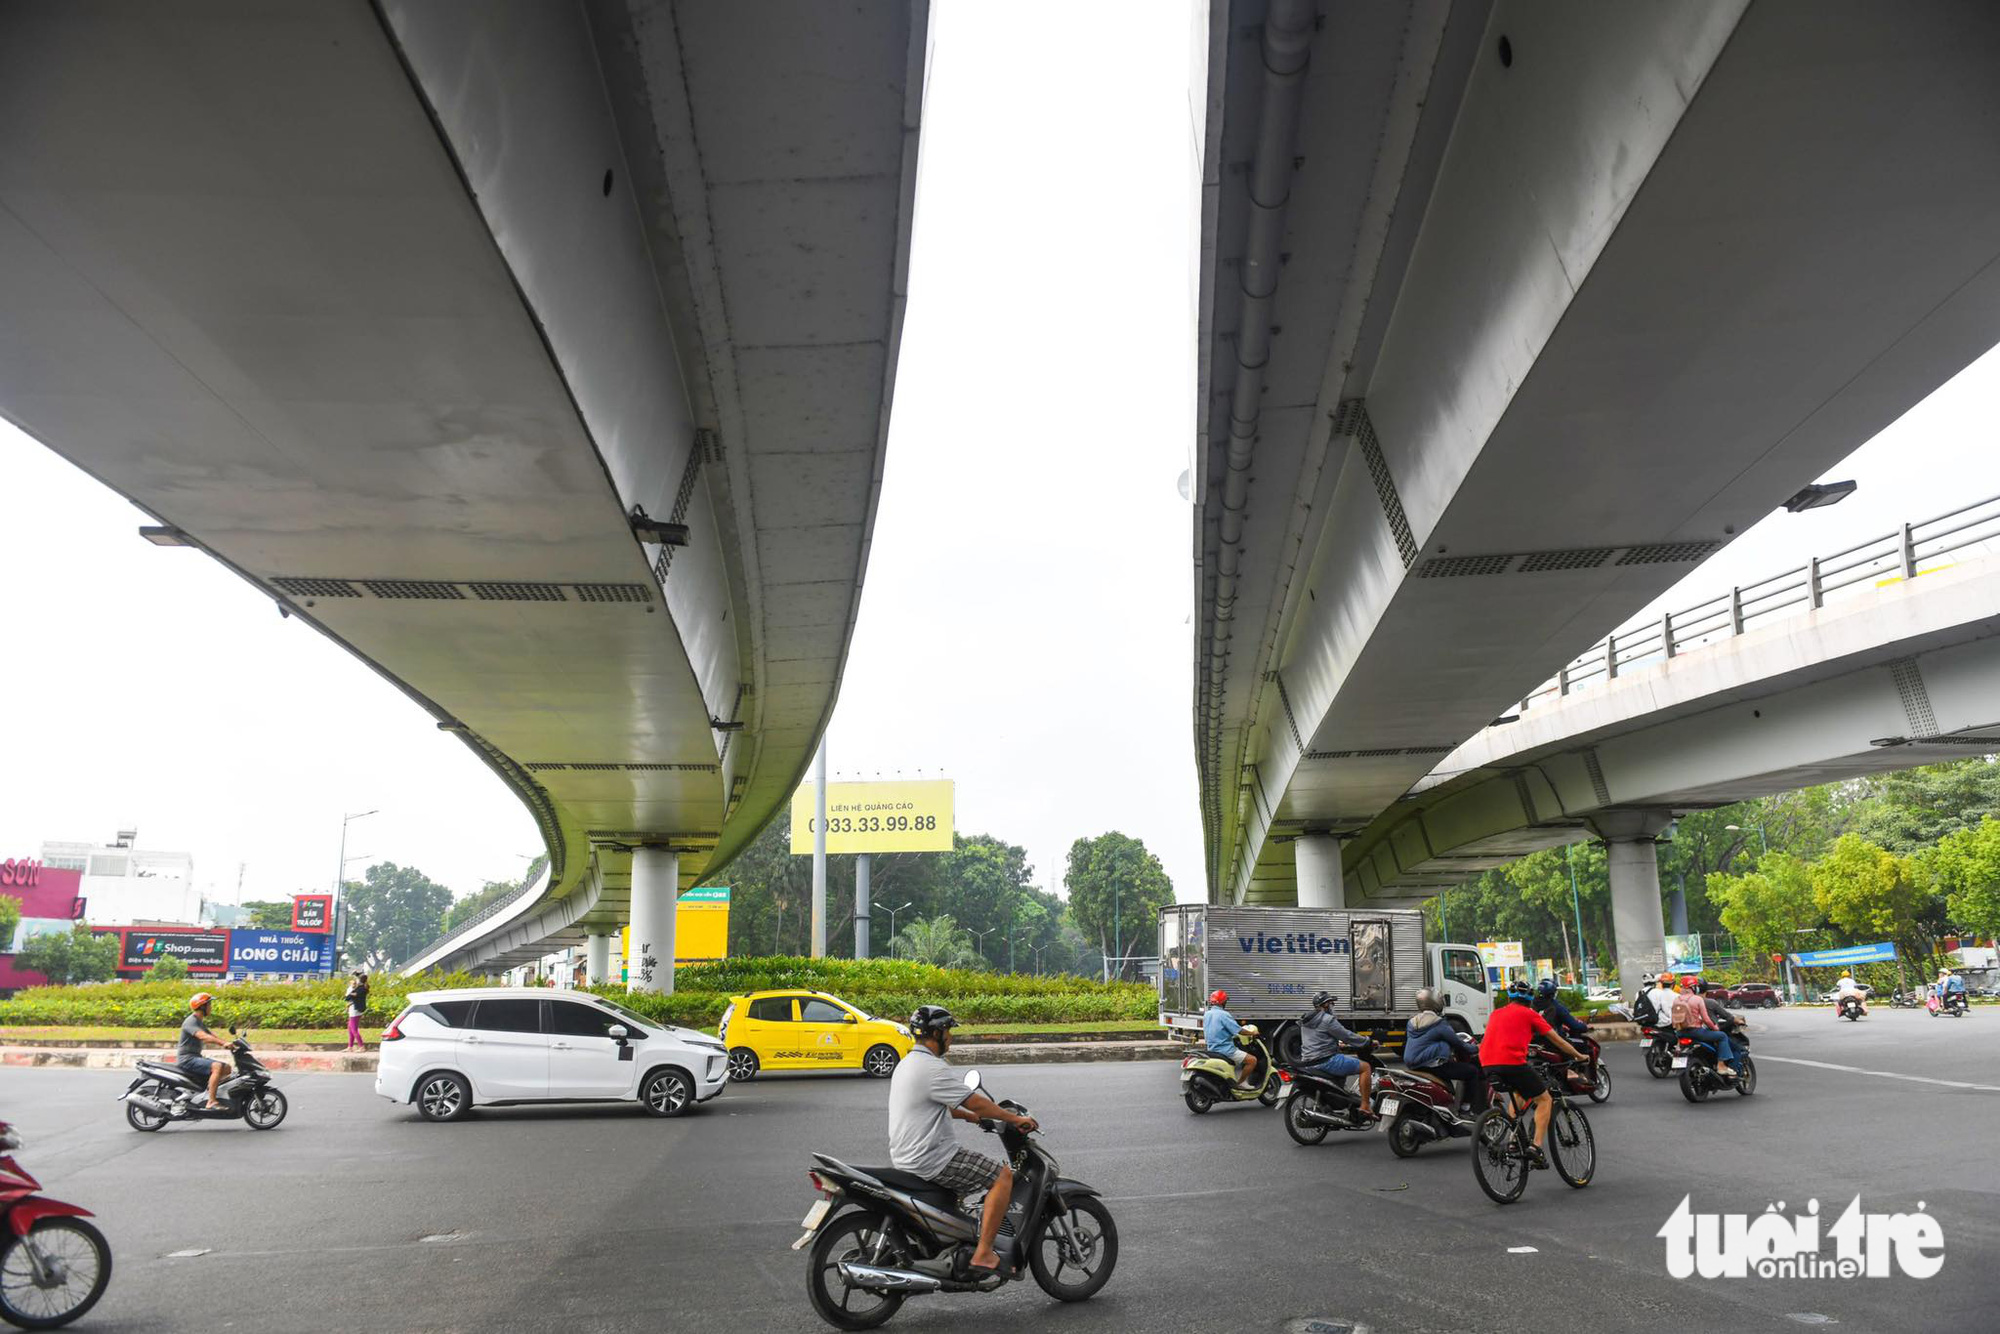 The roundabout was scaled down and a steel overpass from Hoang Minh Giam Street to Nguyen Thai Son Street was constructed. In addition, traffic lights were installed.